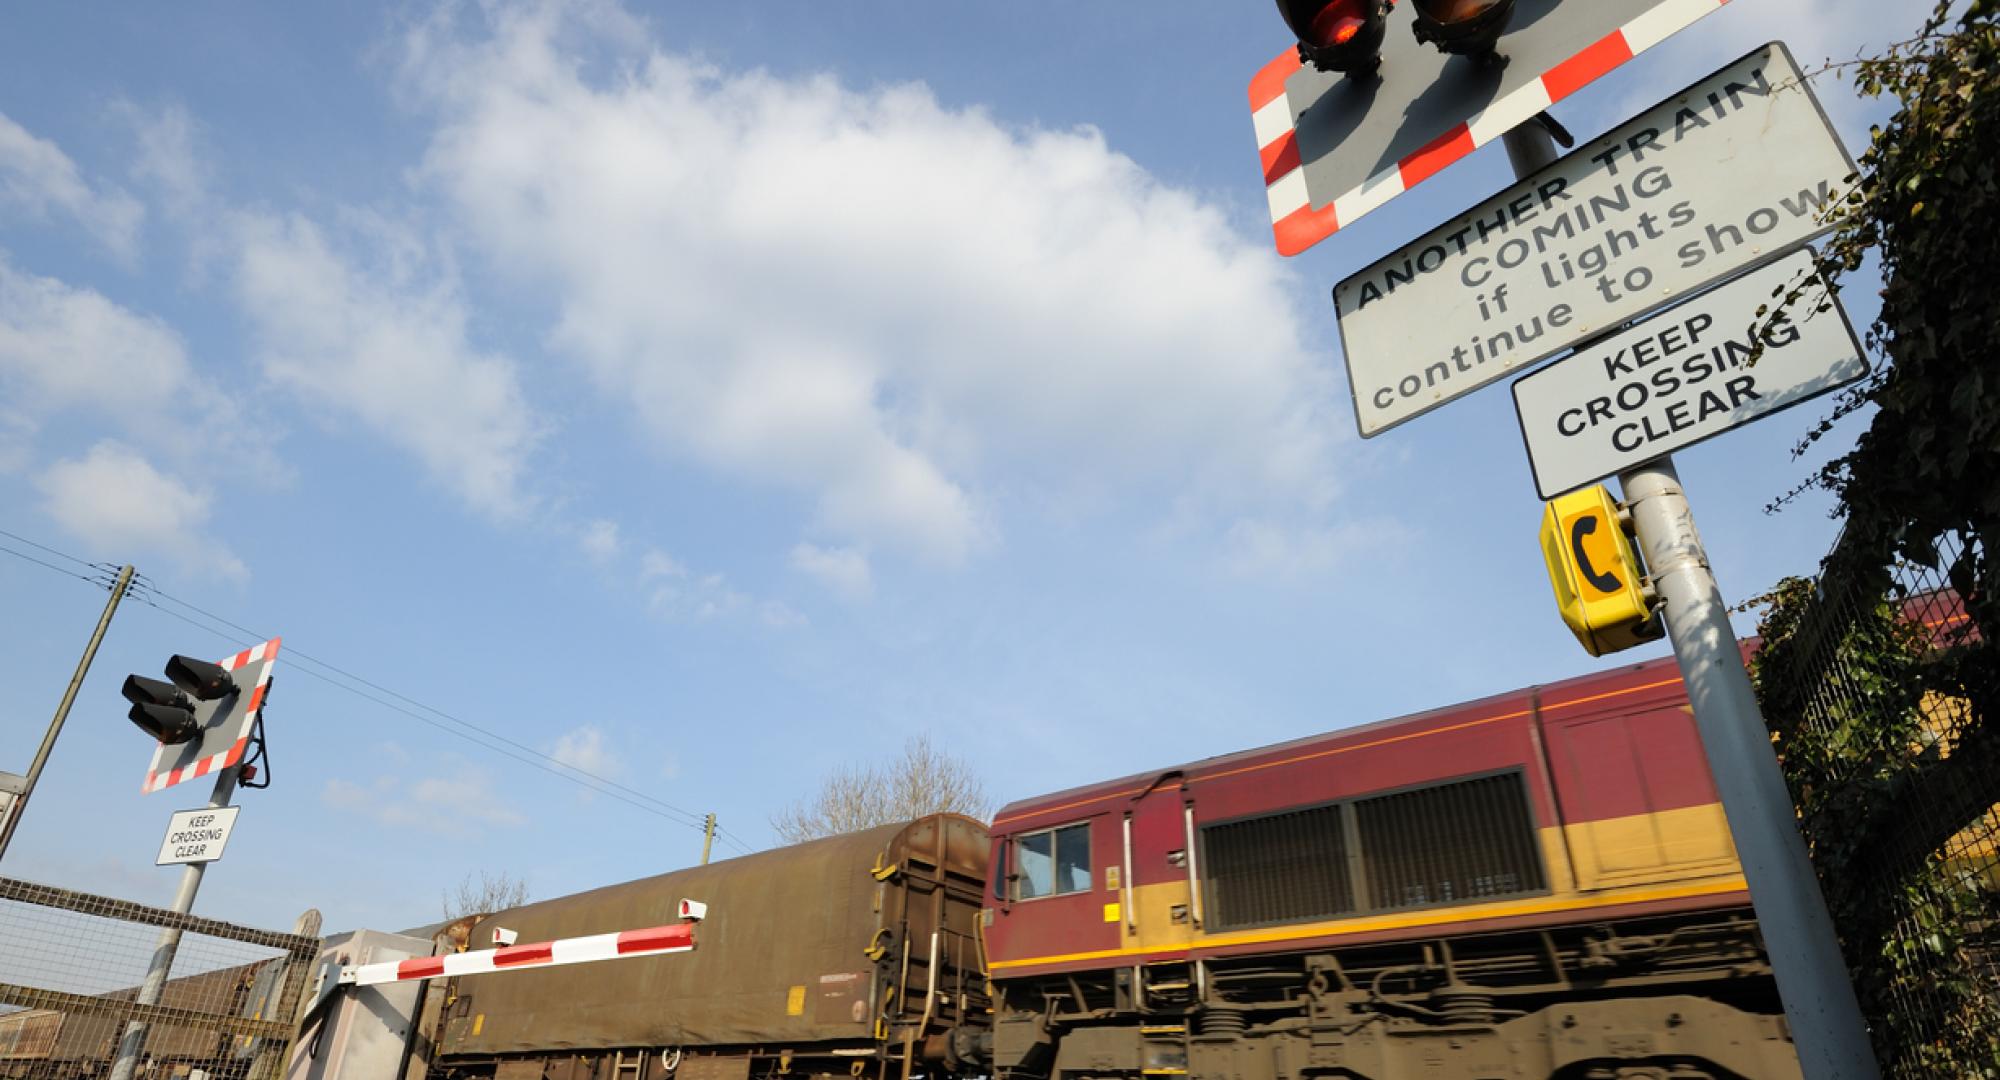 Freight train going through a level crossing